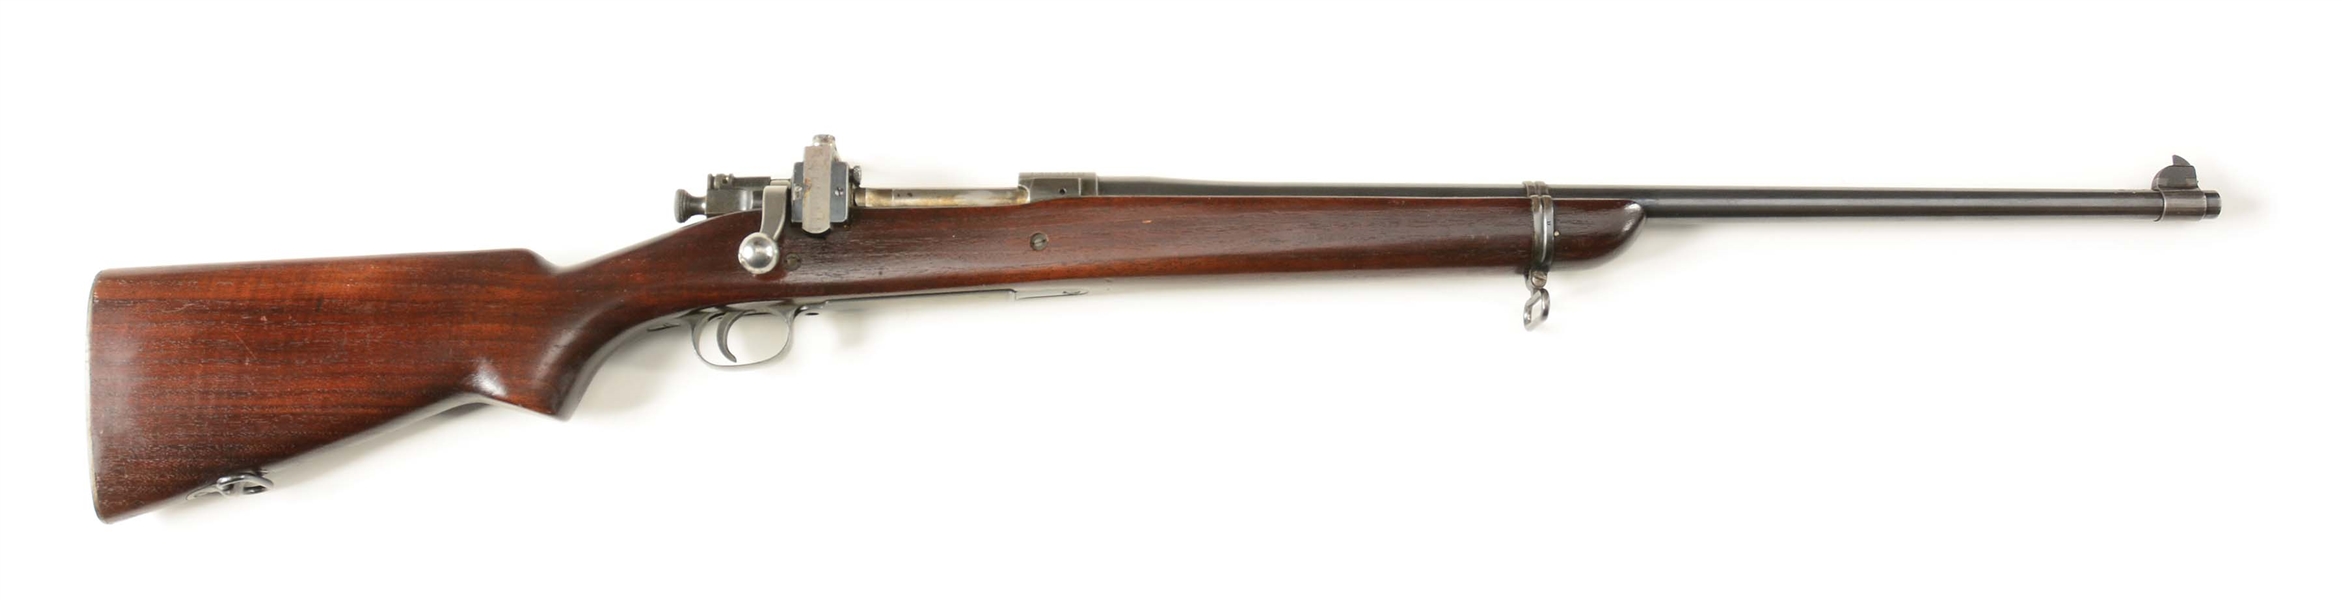 (C) DESIRABLE SPRINGFIELD ARMORY MODEL 1903 NRA SPORTER BOLT ACTION RIFLE.